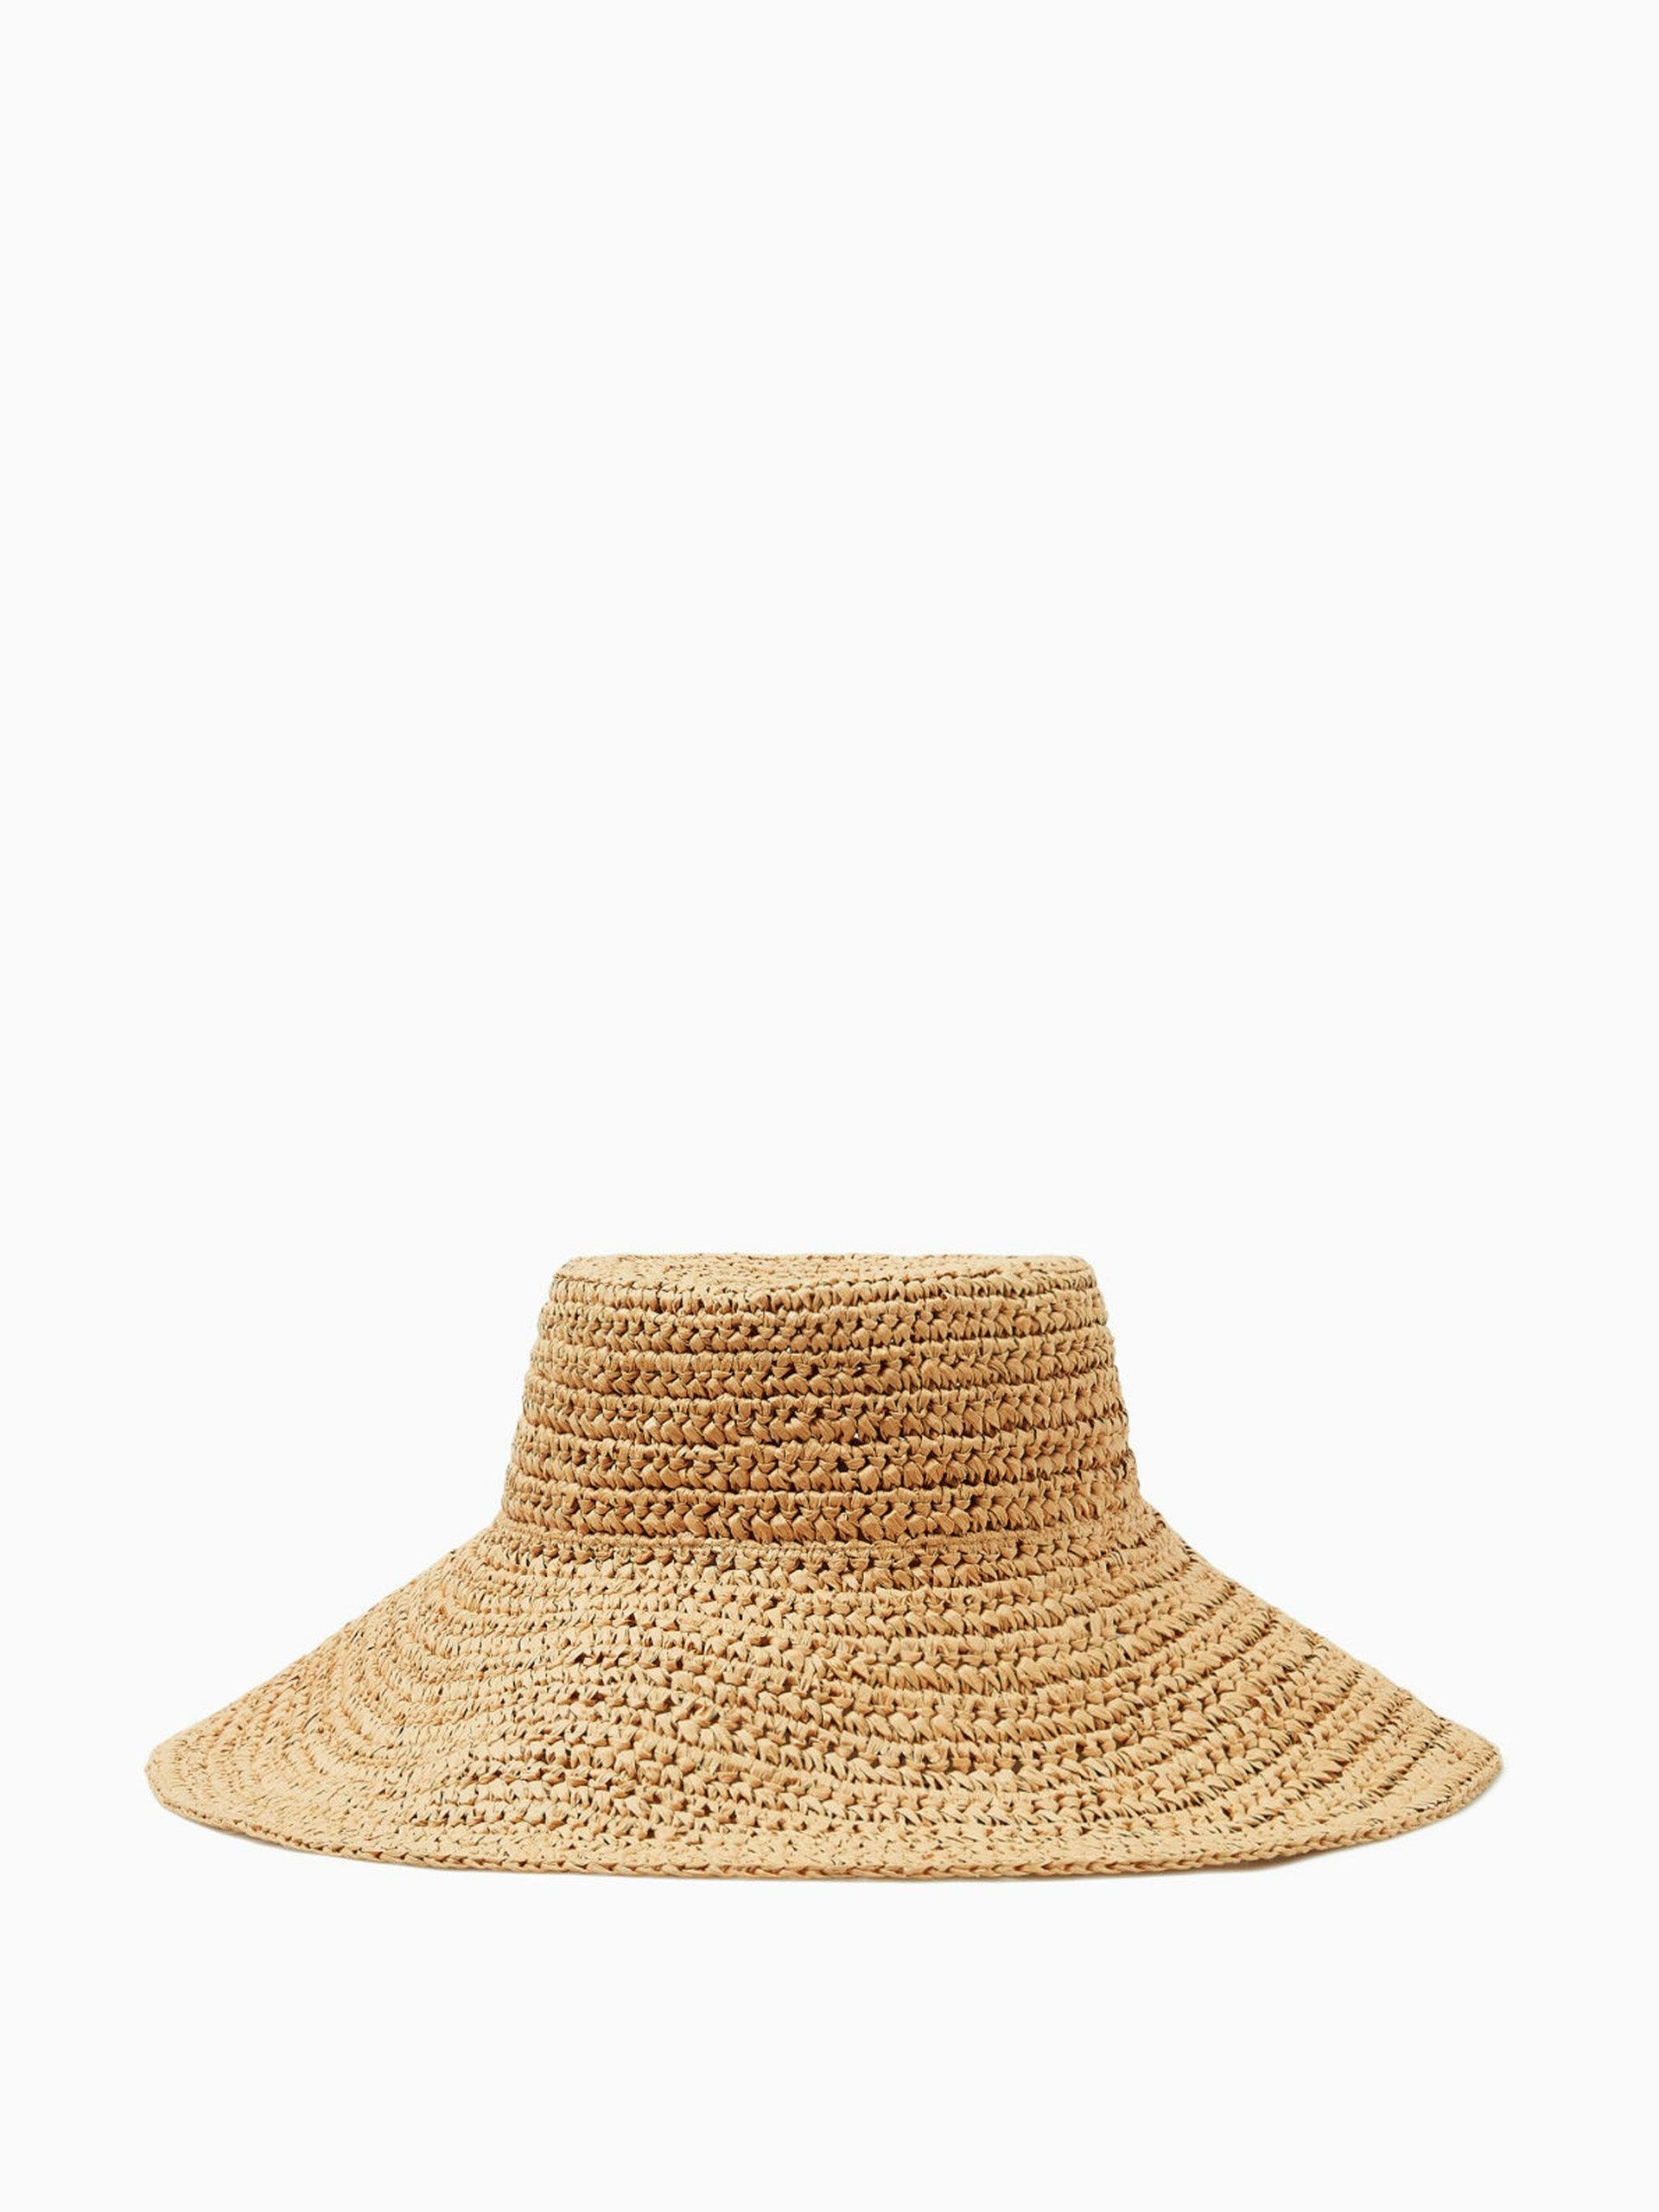 Woven straw hat